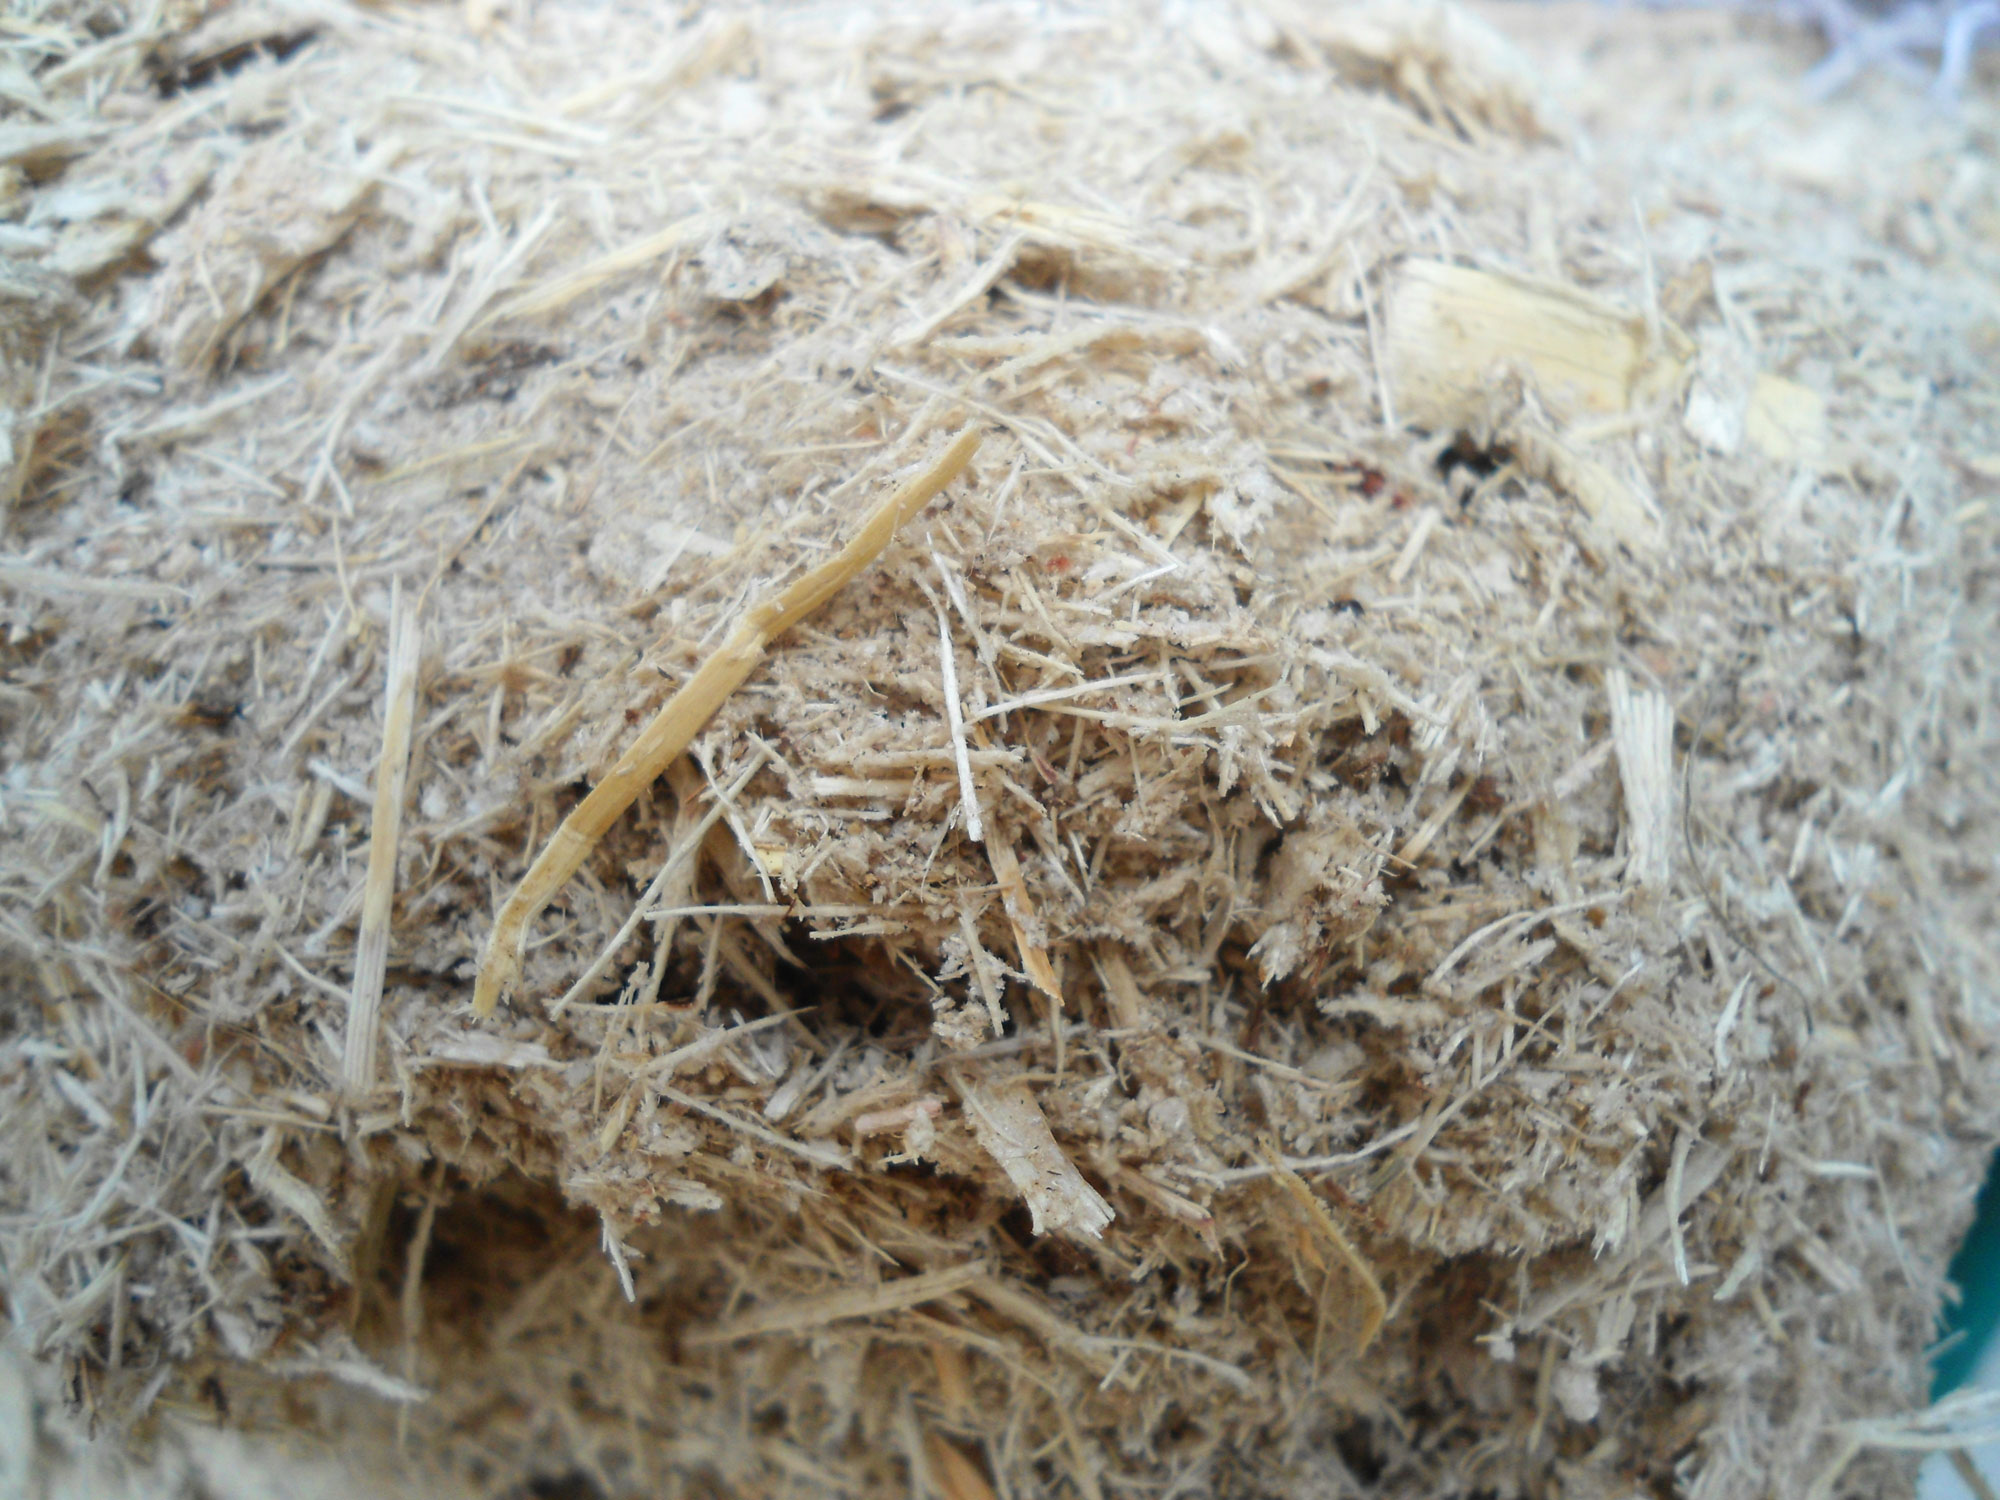 Photograph of bagasse, sugarcane solids left over after the juice has been expressed. The photo shows tan, fibrous plant material.